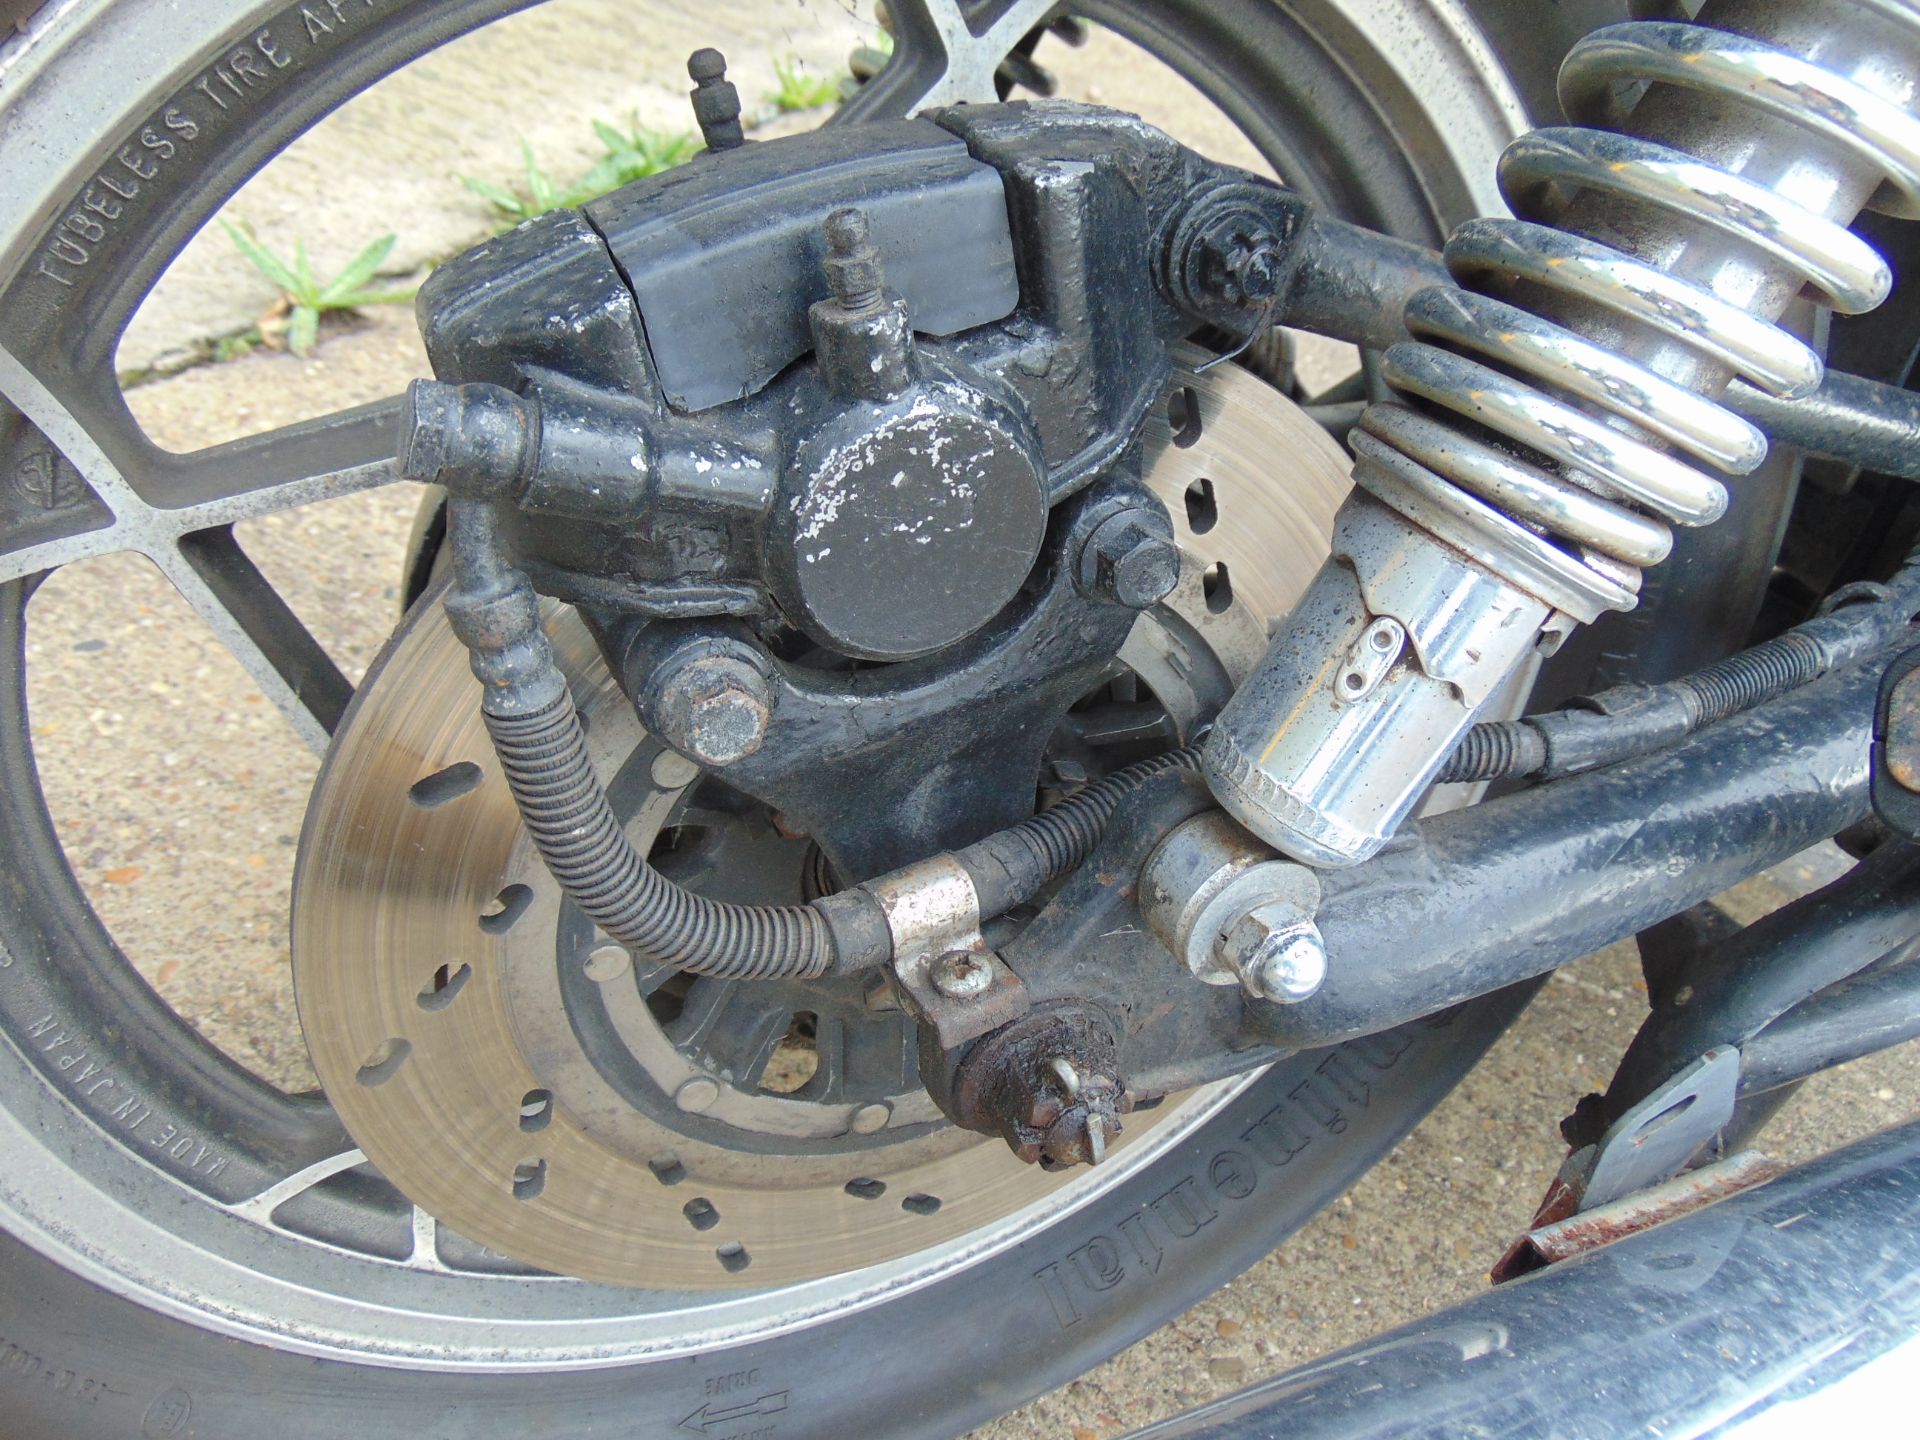 Rare Classic 1980 Suzuki GS1000 G Shaft Drive from a private collection - Image 13 of 18